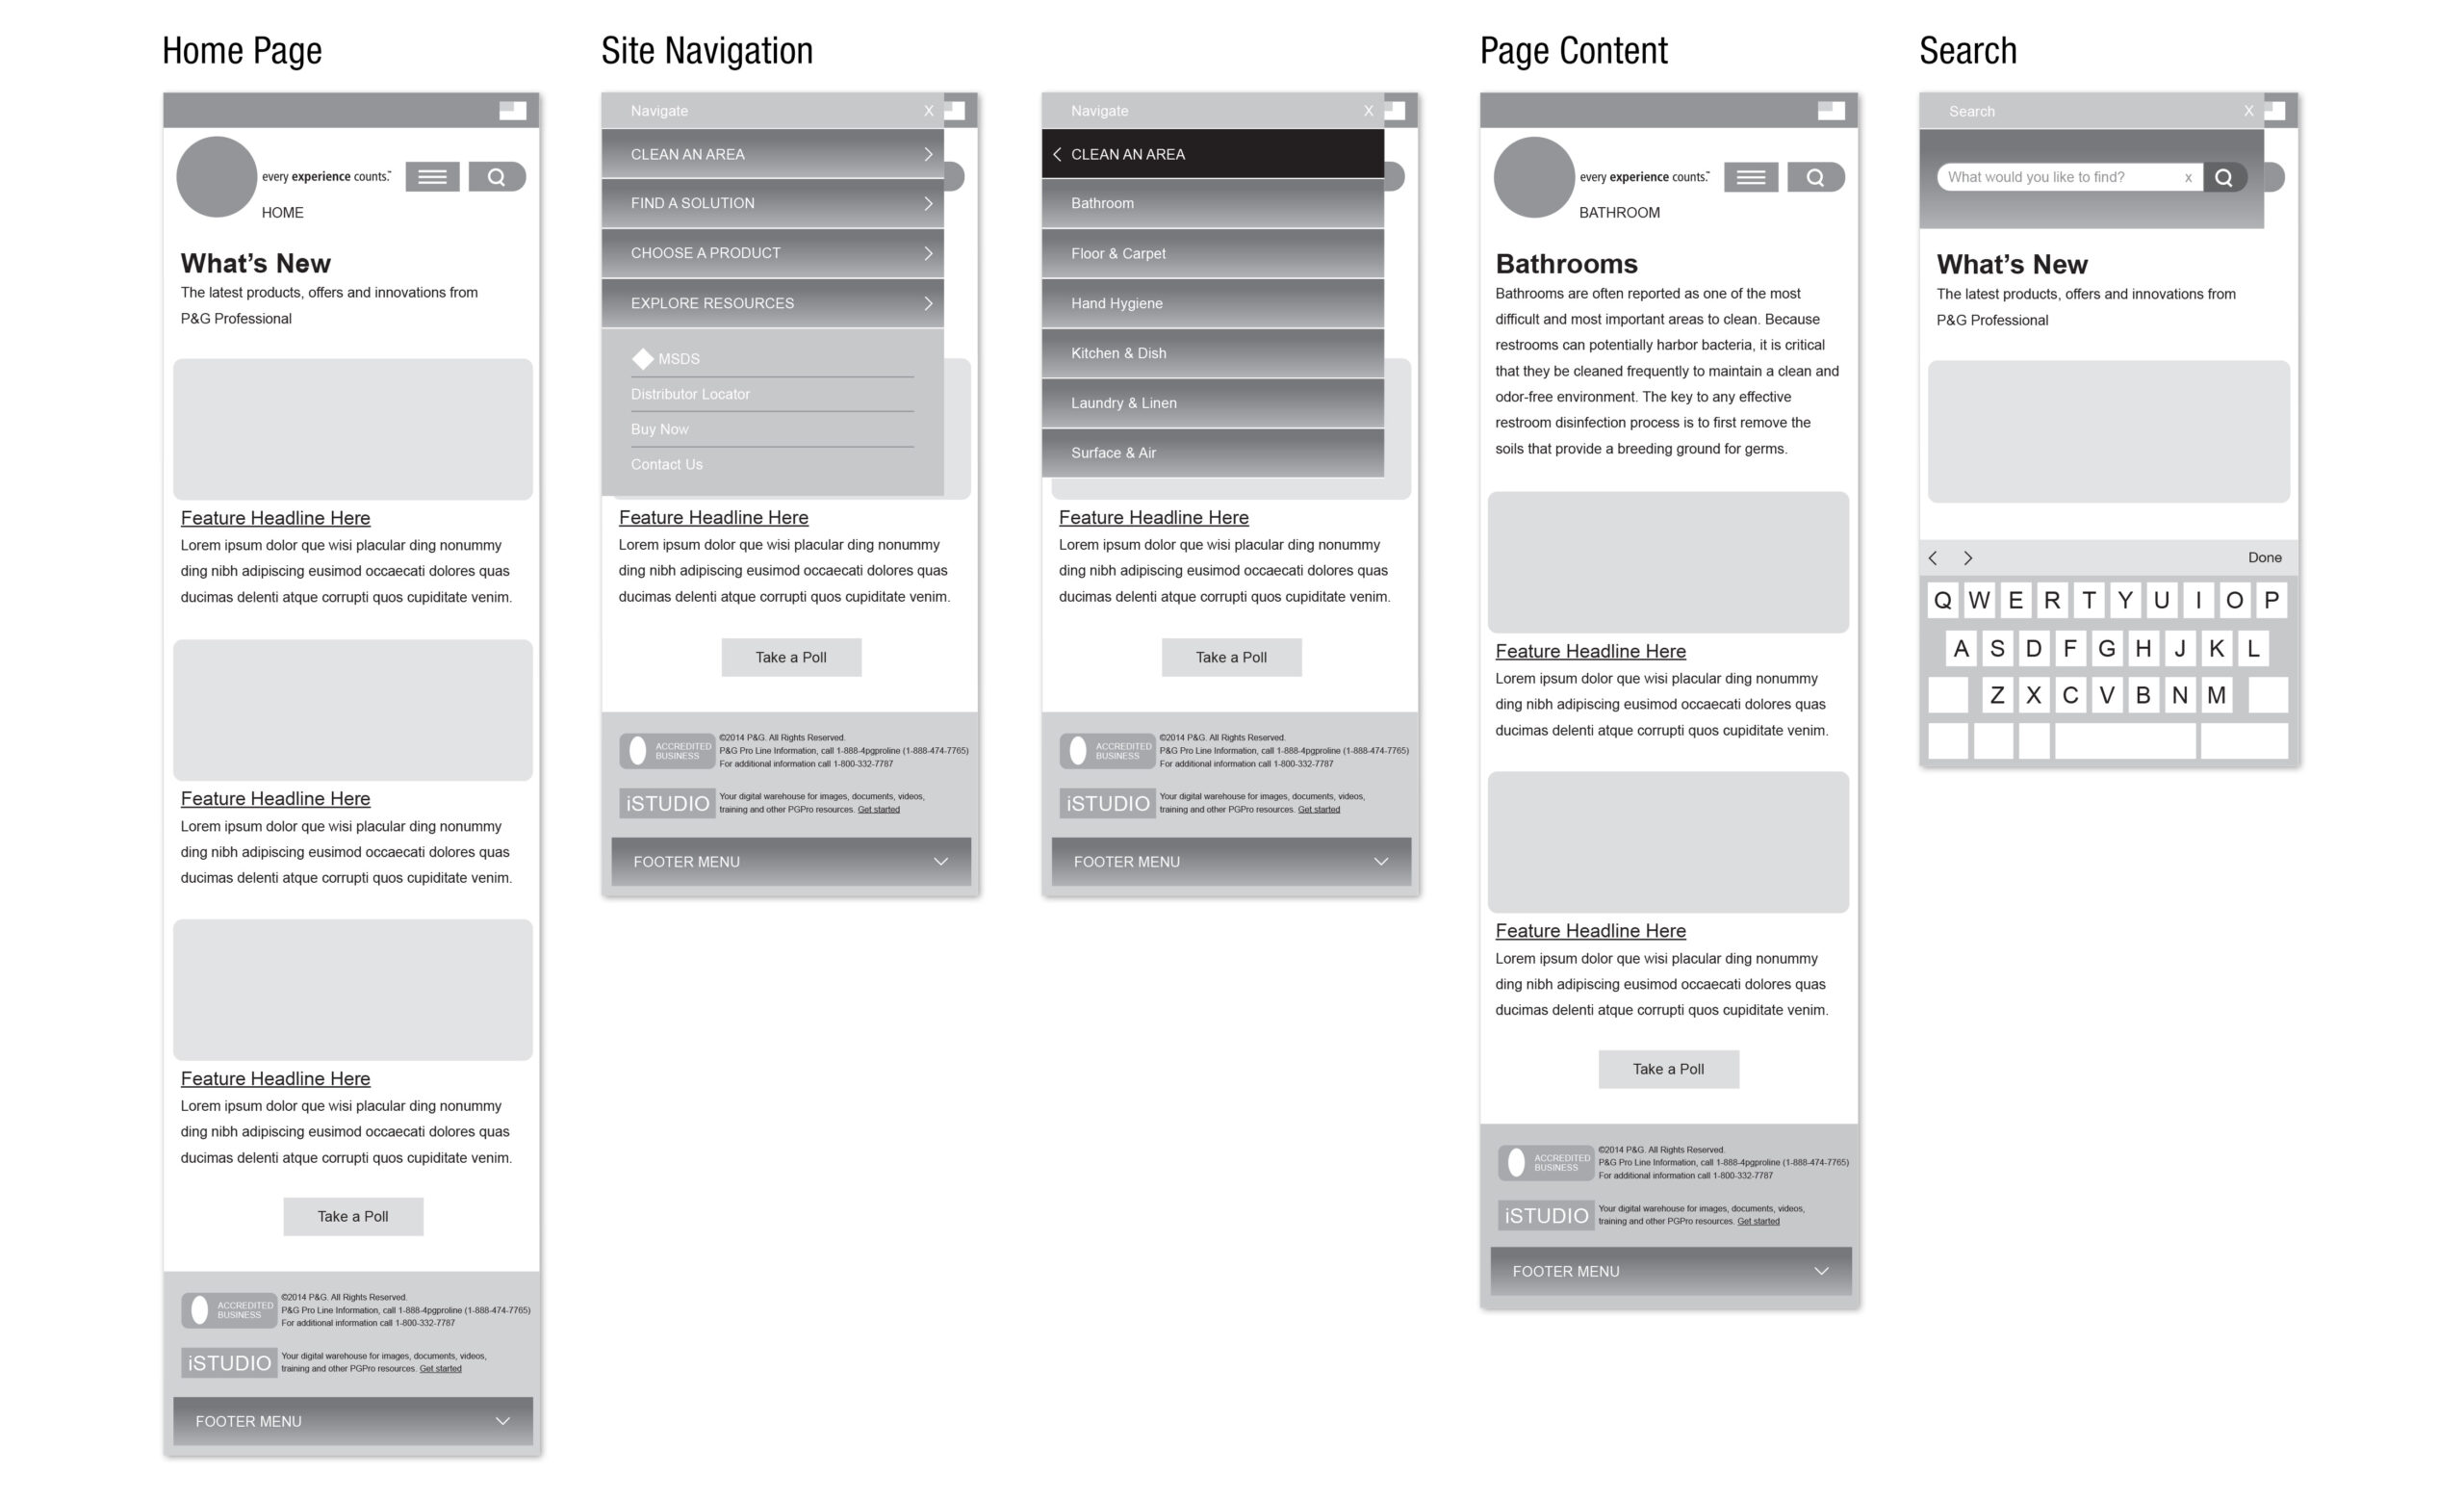 Procter and Gamble mobile website wireframes